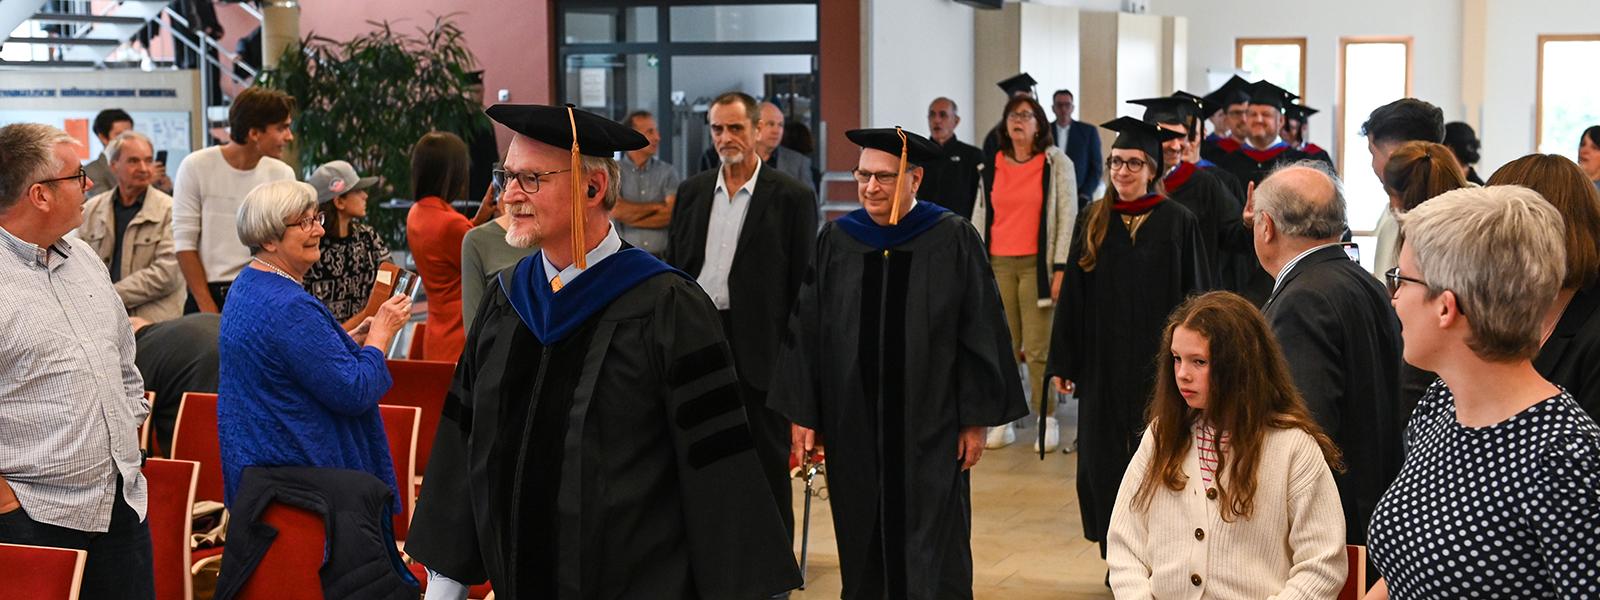 CIU Interim President Dr. Rick Christman (left) and Provost Dr. James Lanpher lead the commencement procession in Korntal.